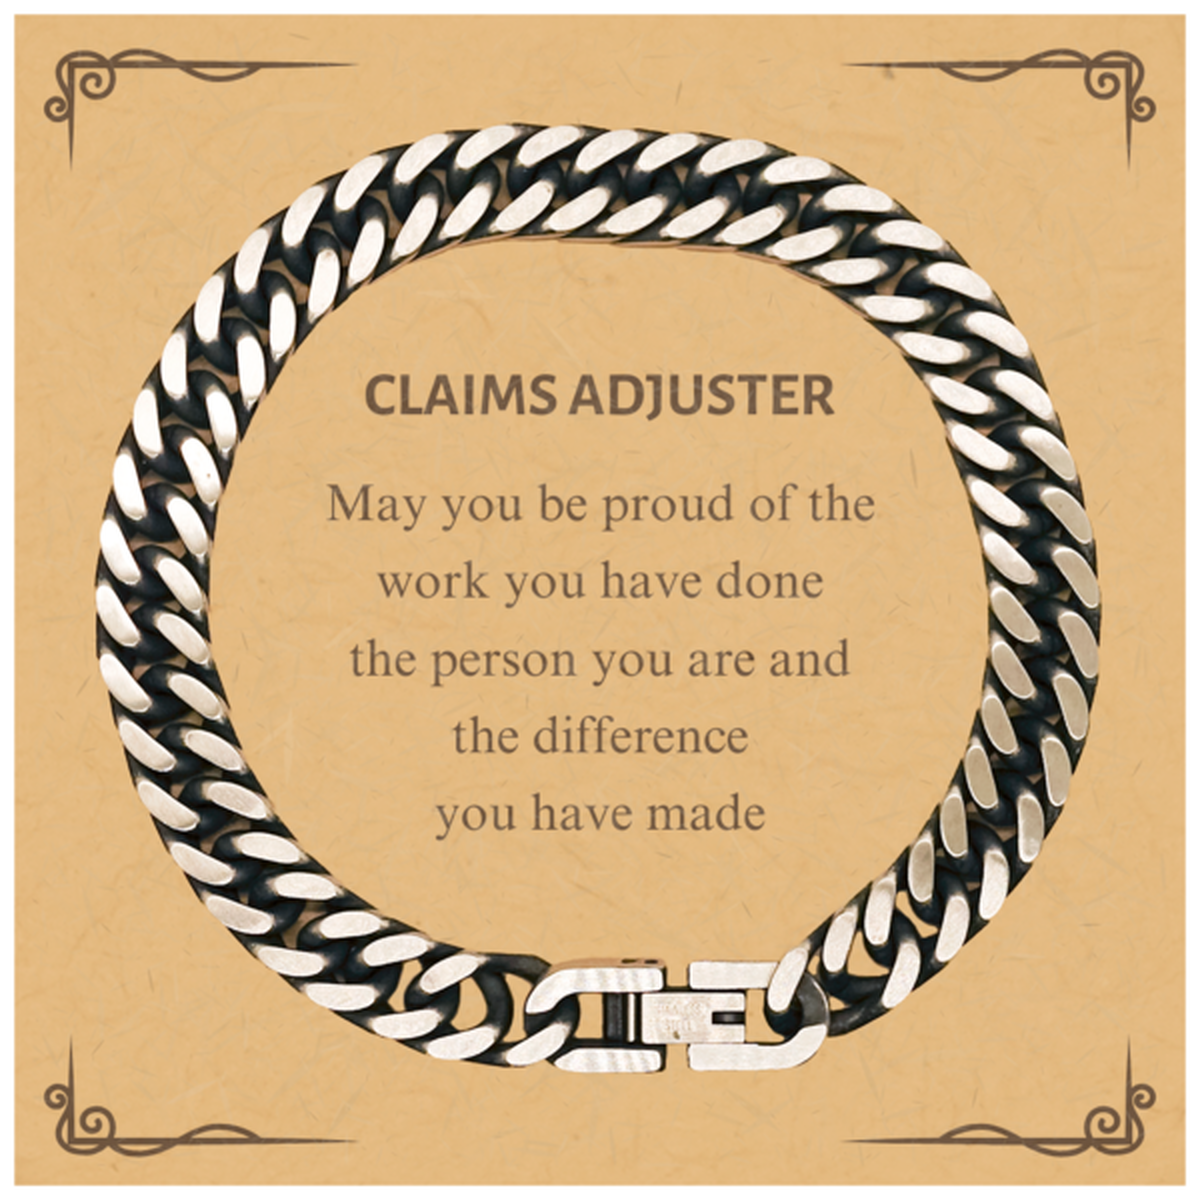 Claims Adjuster May you be proud of the work you have done, Retirement Claims Adjuster Cuban Link Chain Bracelet for Colleague Appreciation Gifts Amazing for Claims Adjuster